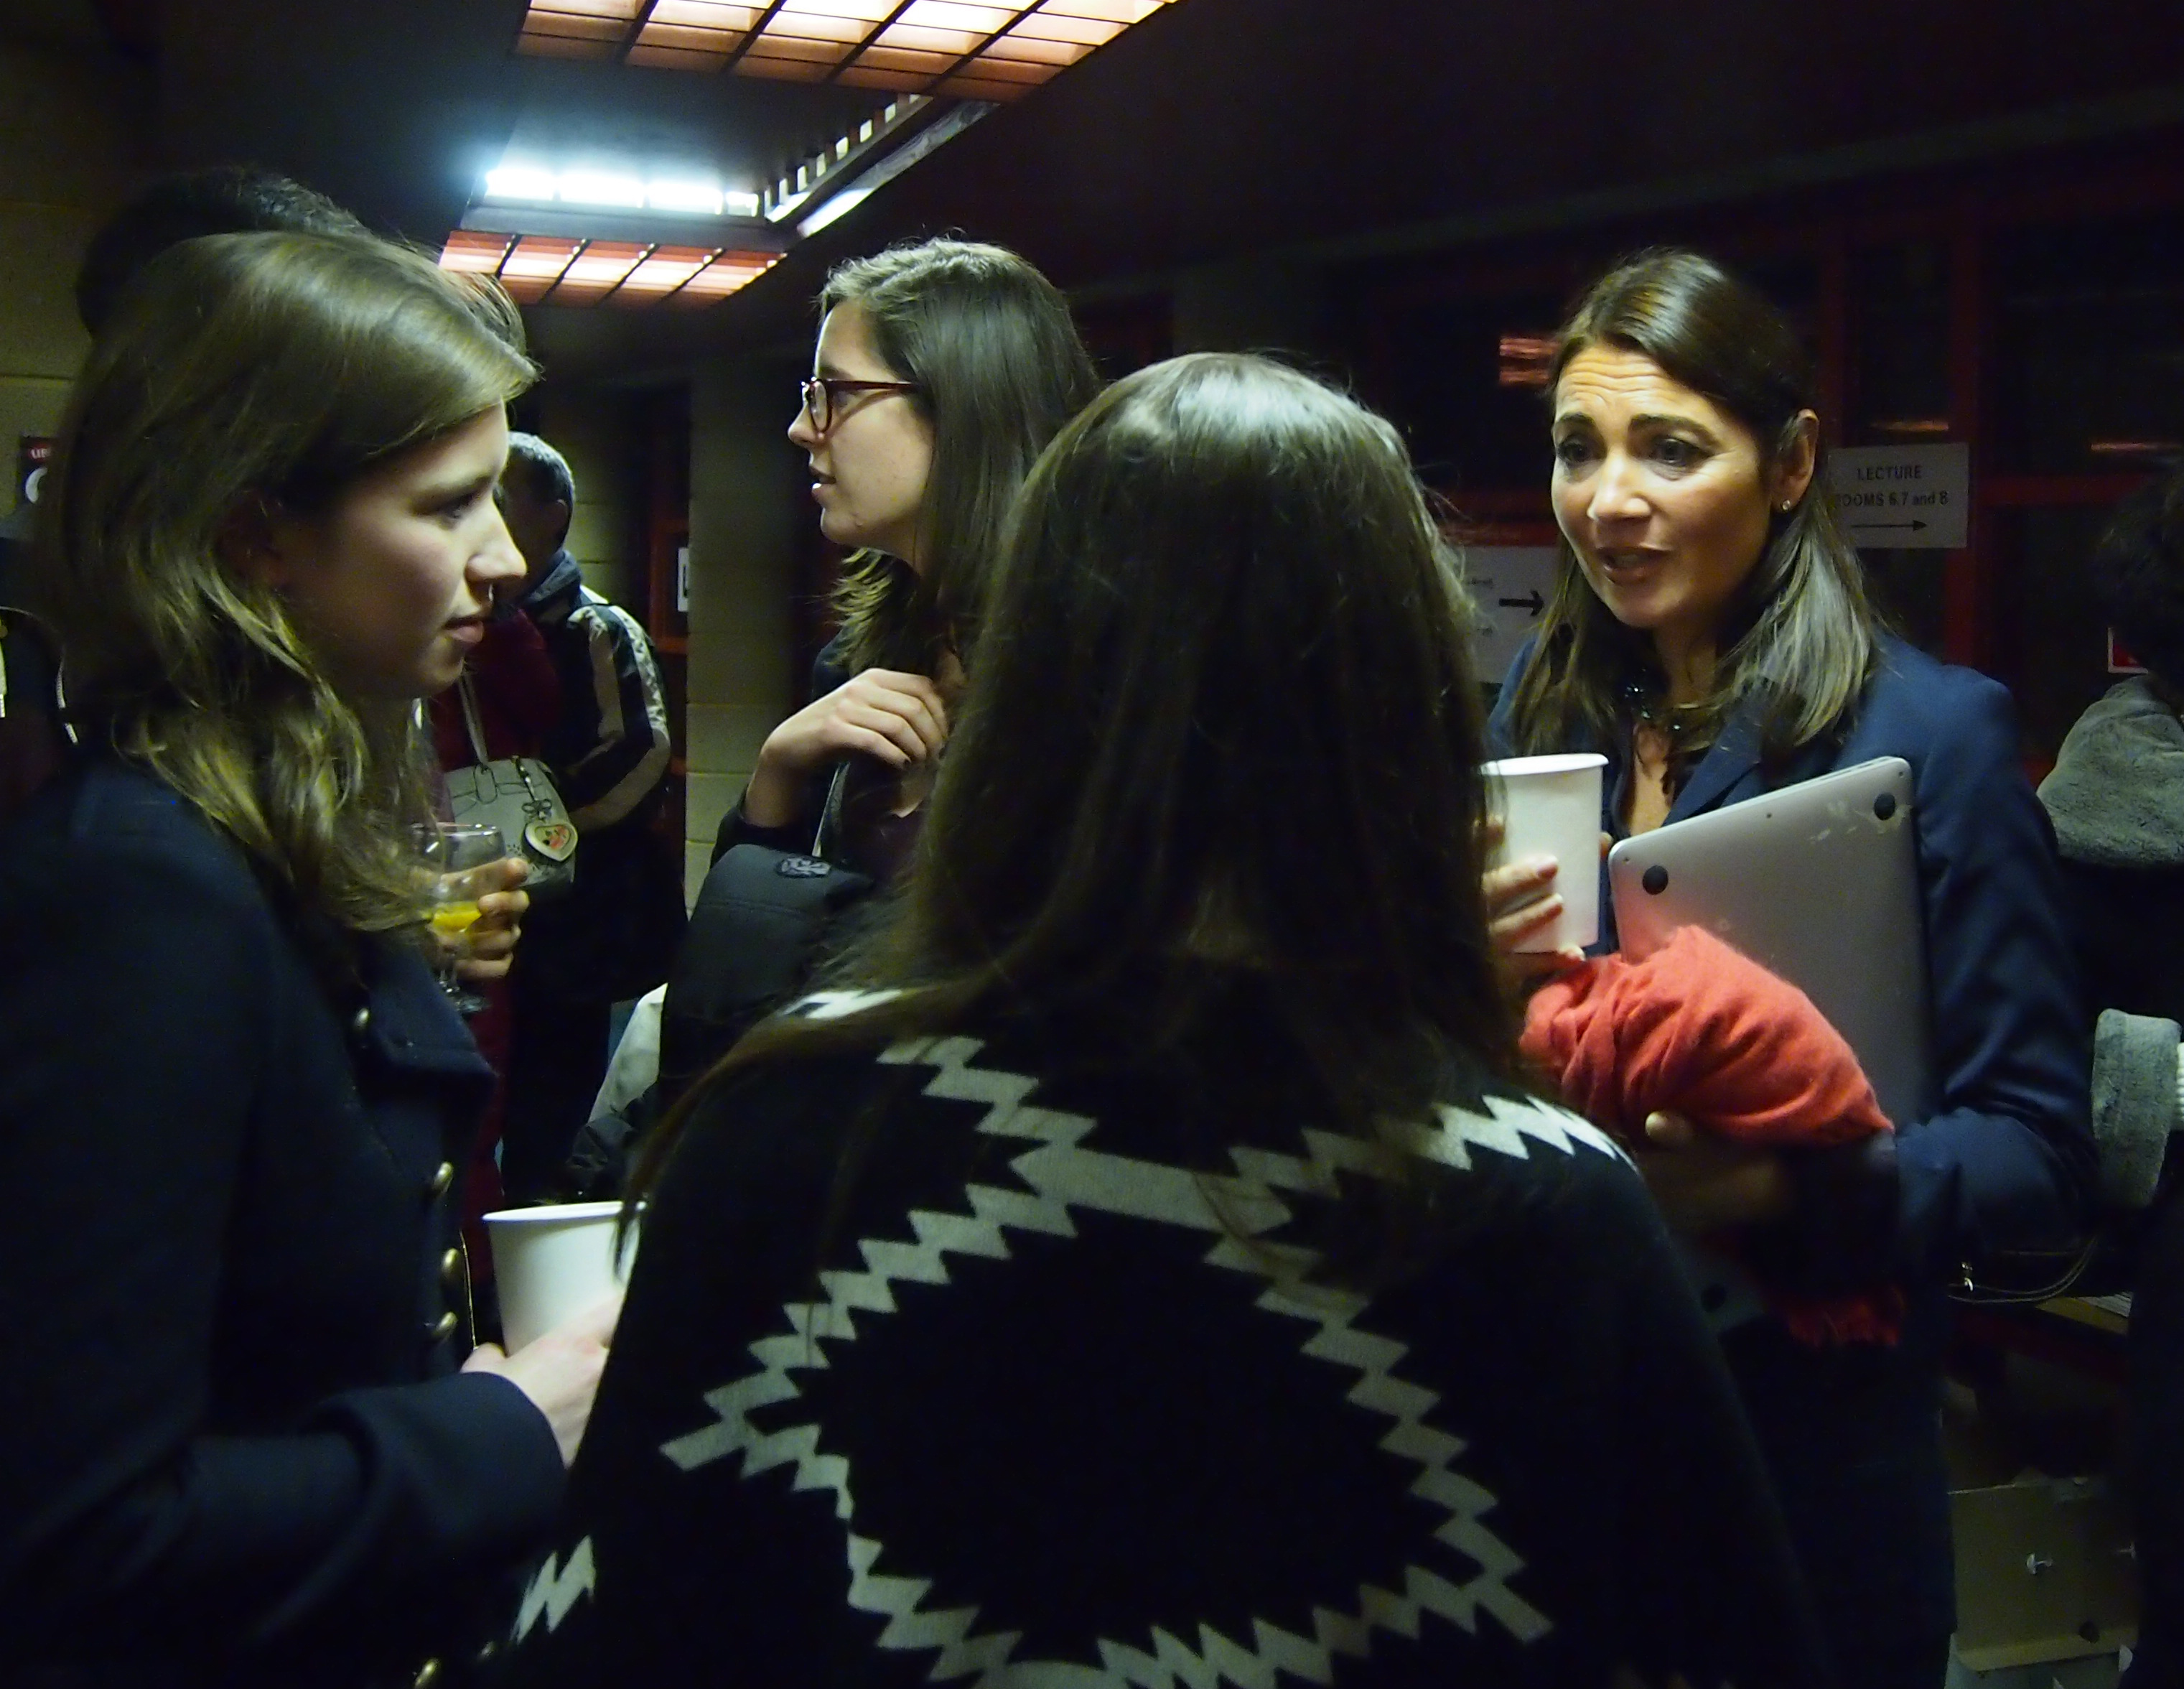 Katya Adler talking to students after the lecture